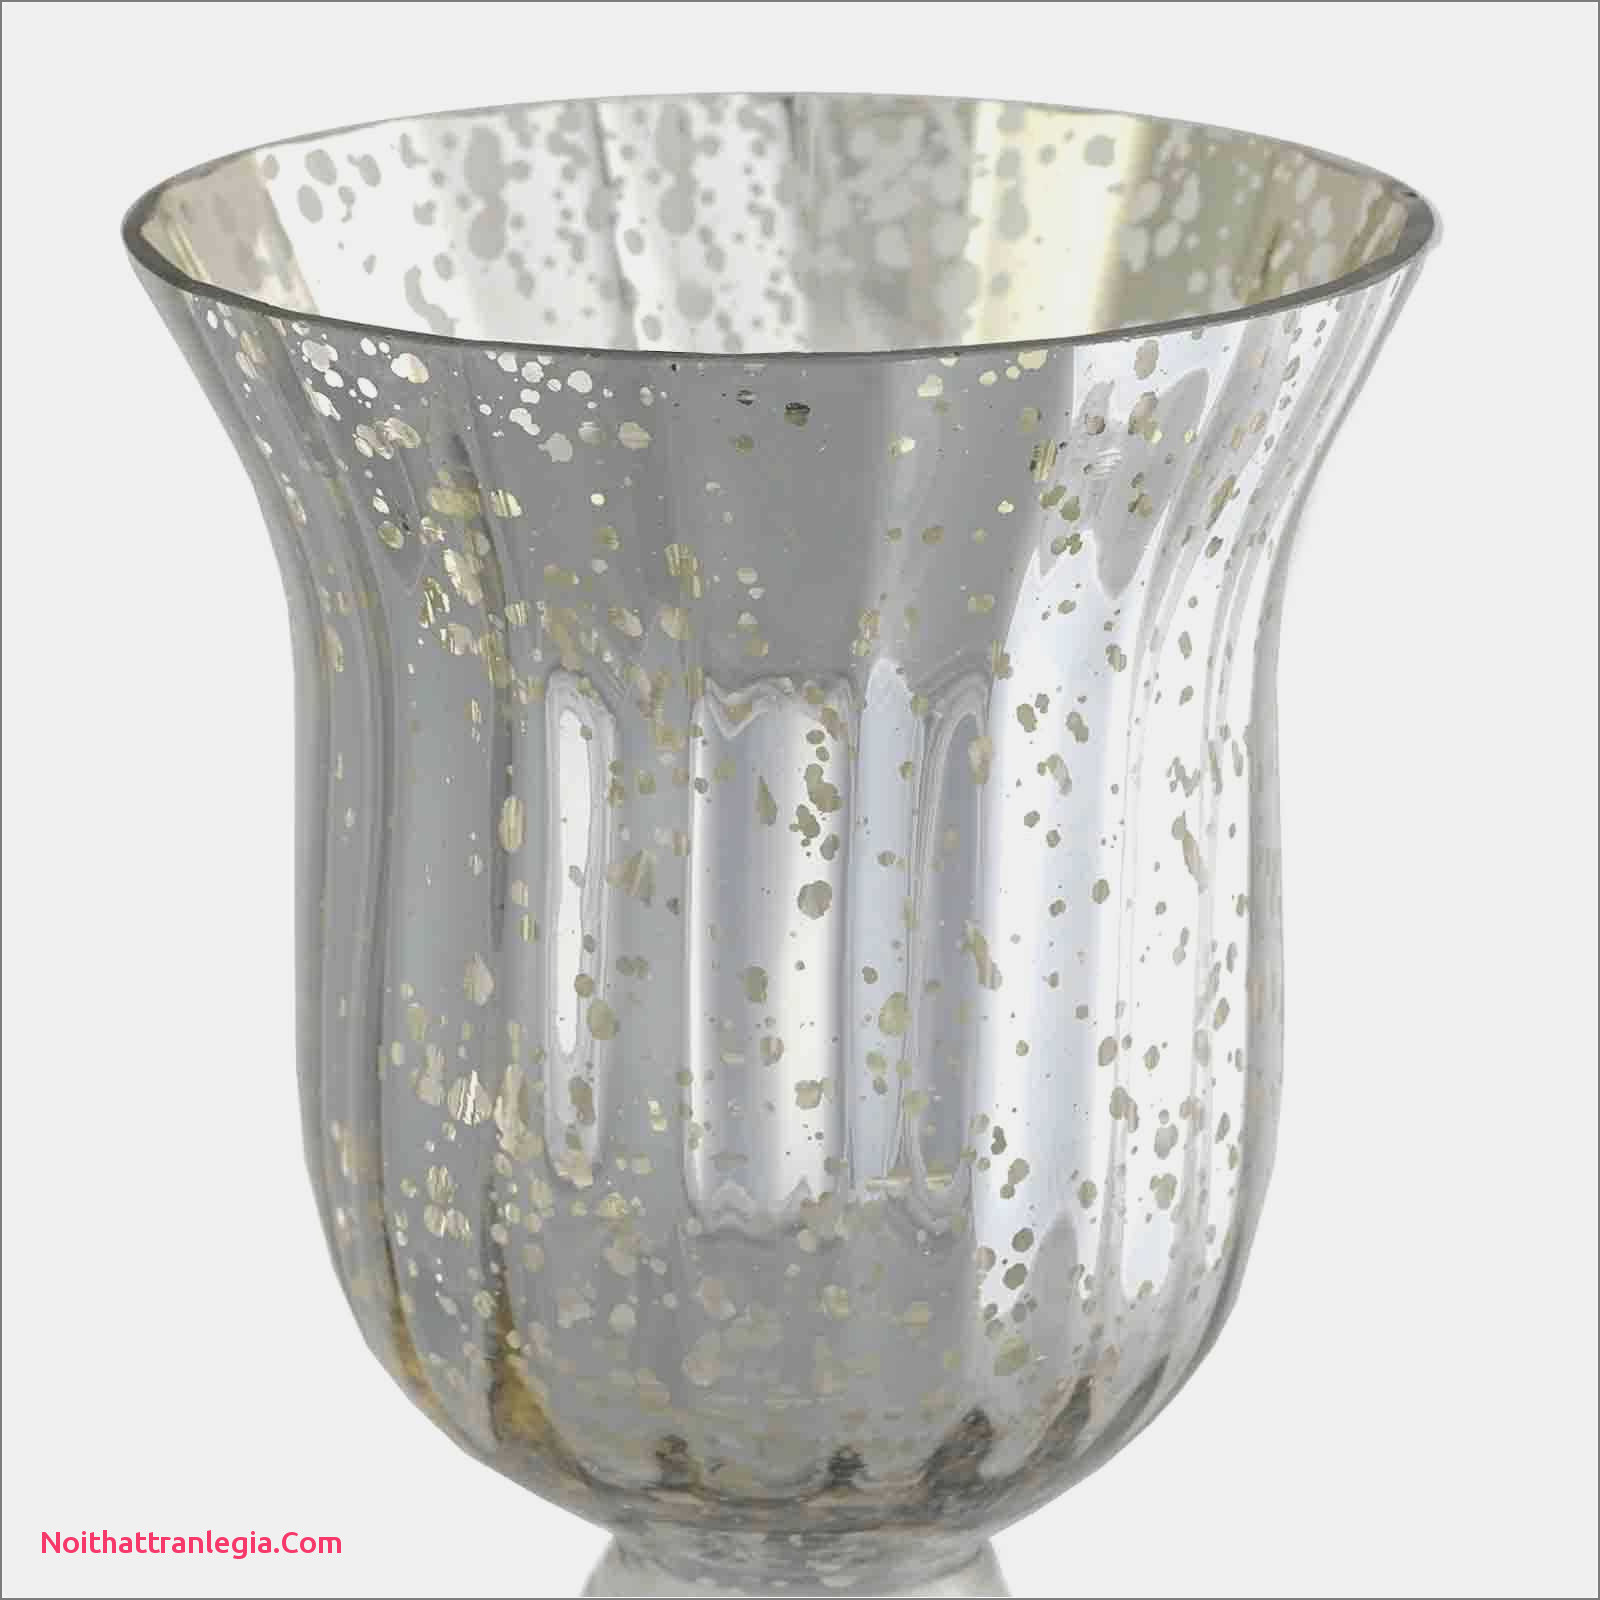 26 Stylish Green Mercury Glass Vase 2024 free download green mercury glass vase of 20 wedding vases noithattranlegia vases design intended for wedding guest gift ideas inspirational candles for wedding favors superb pe s5h vases candle vase i